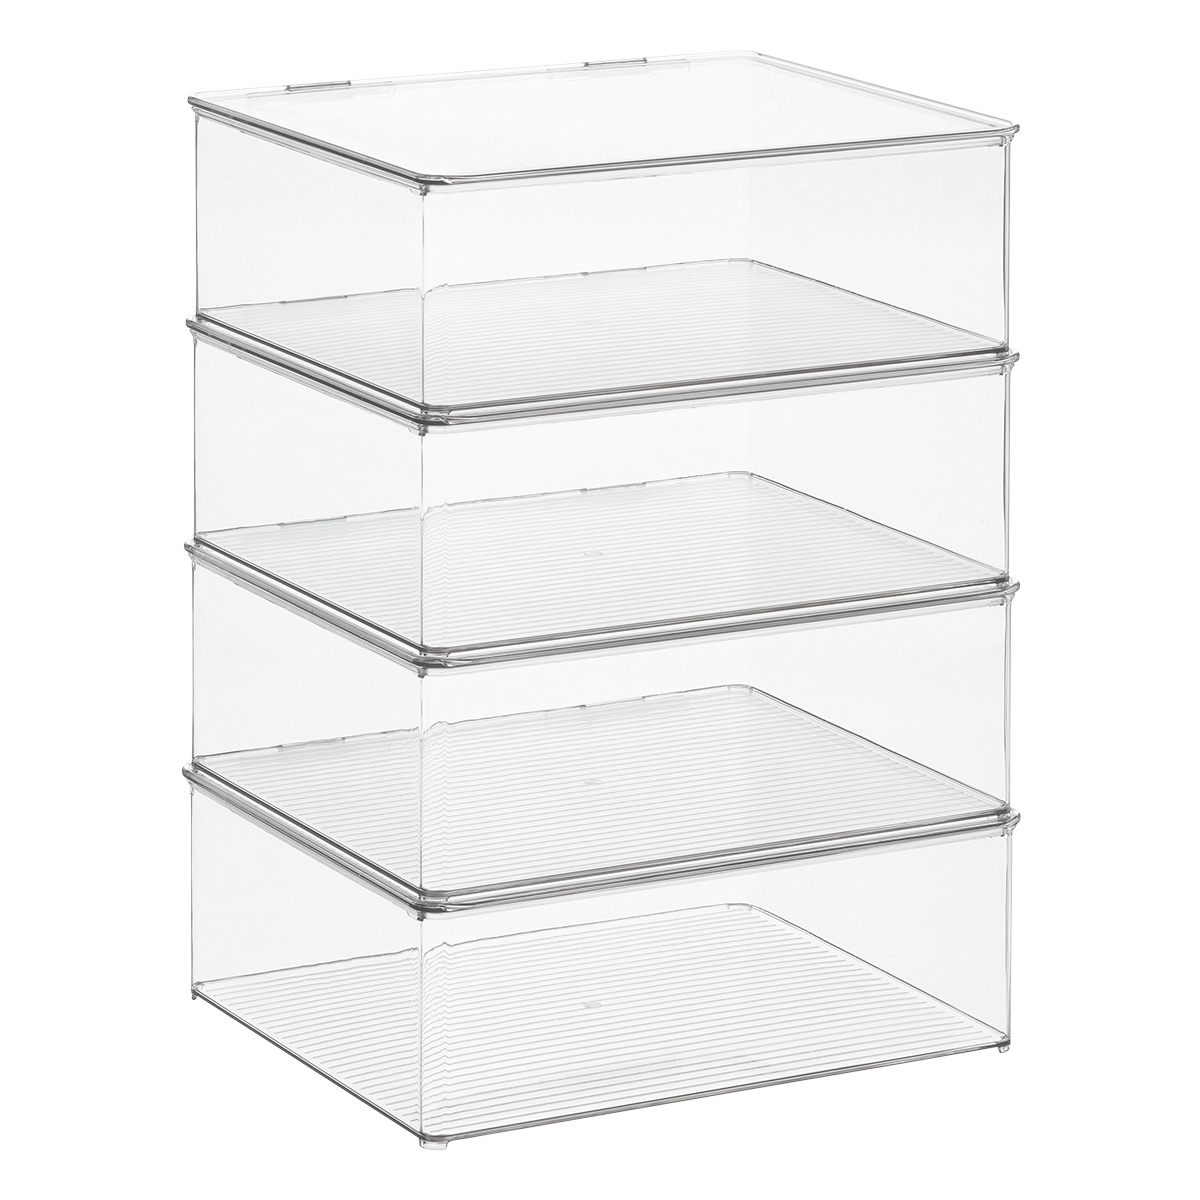 iDesign Case of 4 Hinged-Lid Stackable Shirt Box Clear